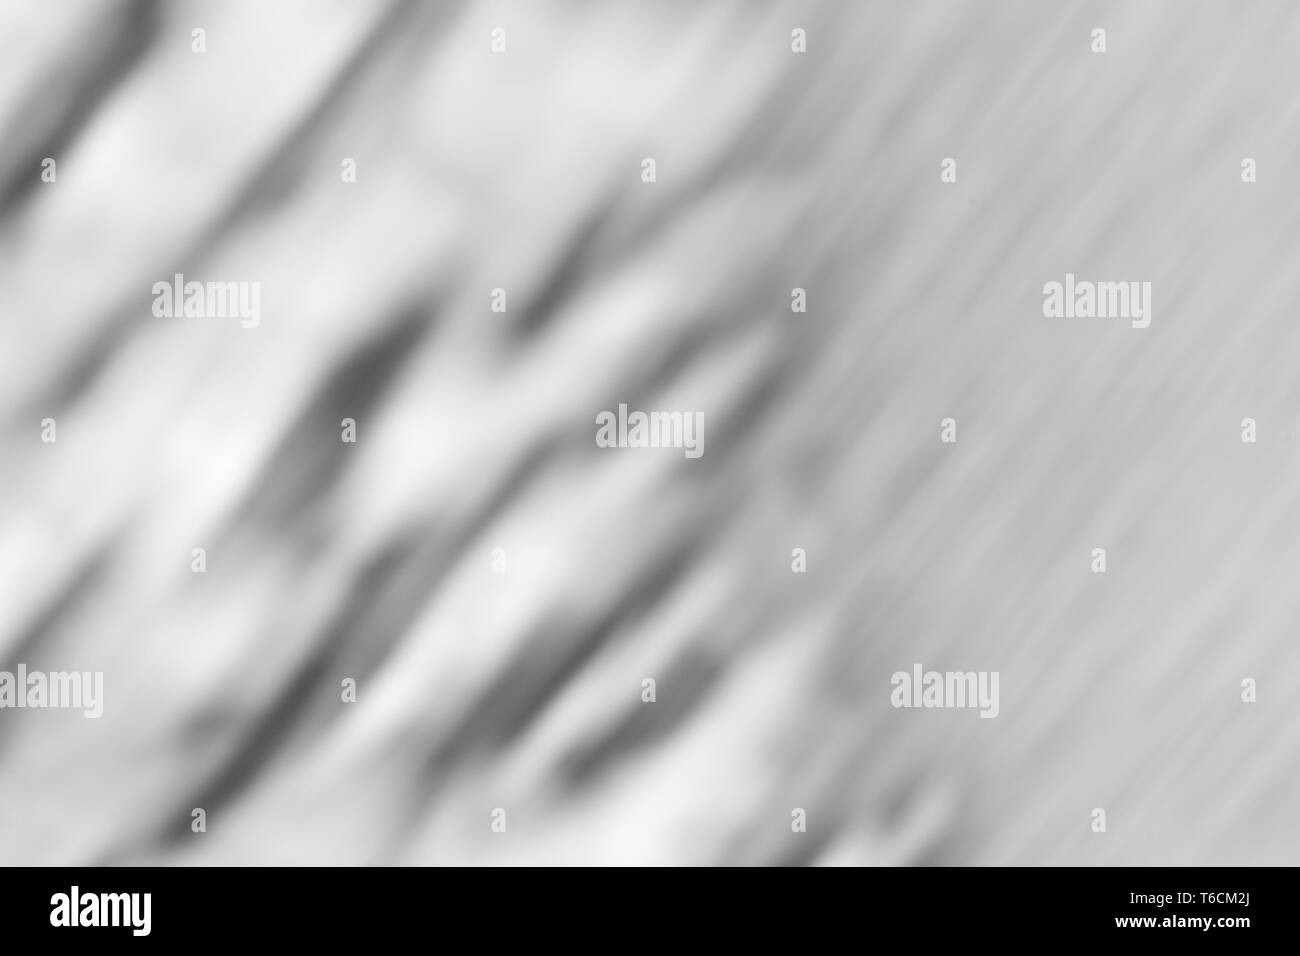 blurred motion background for overlays Stock Photo